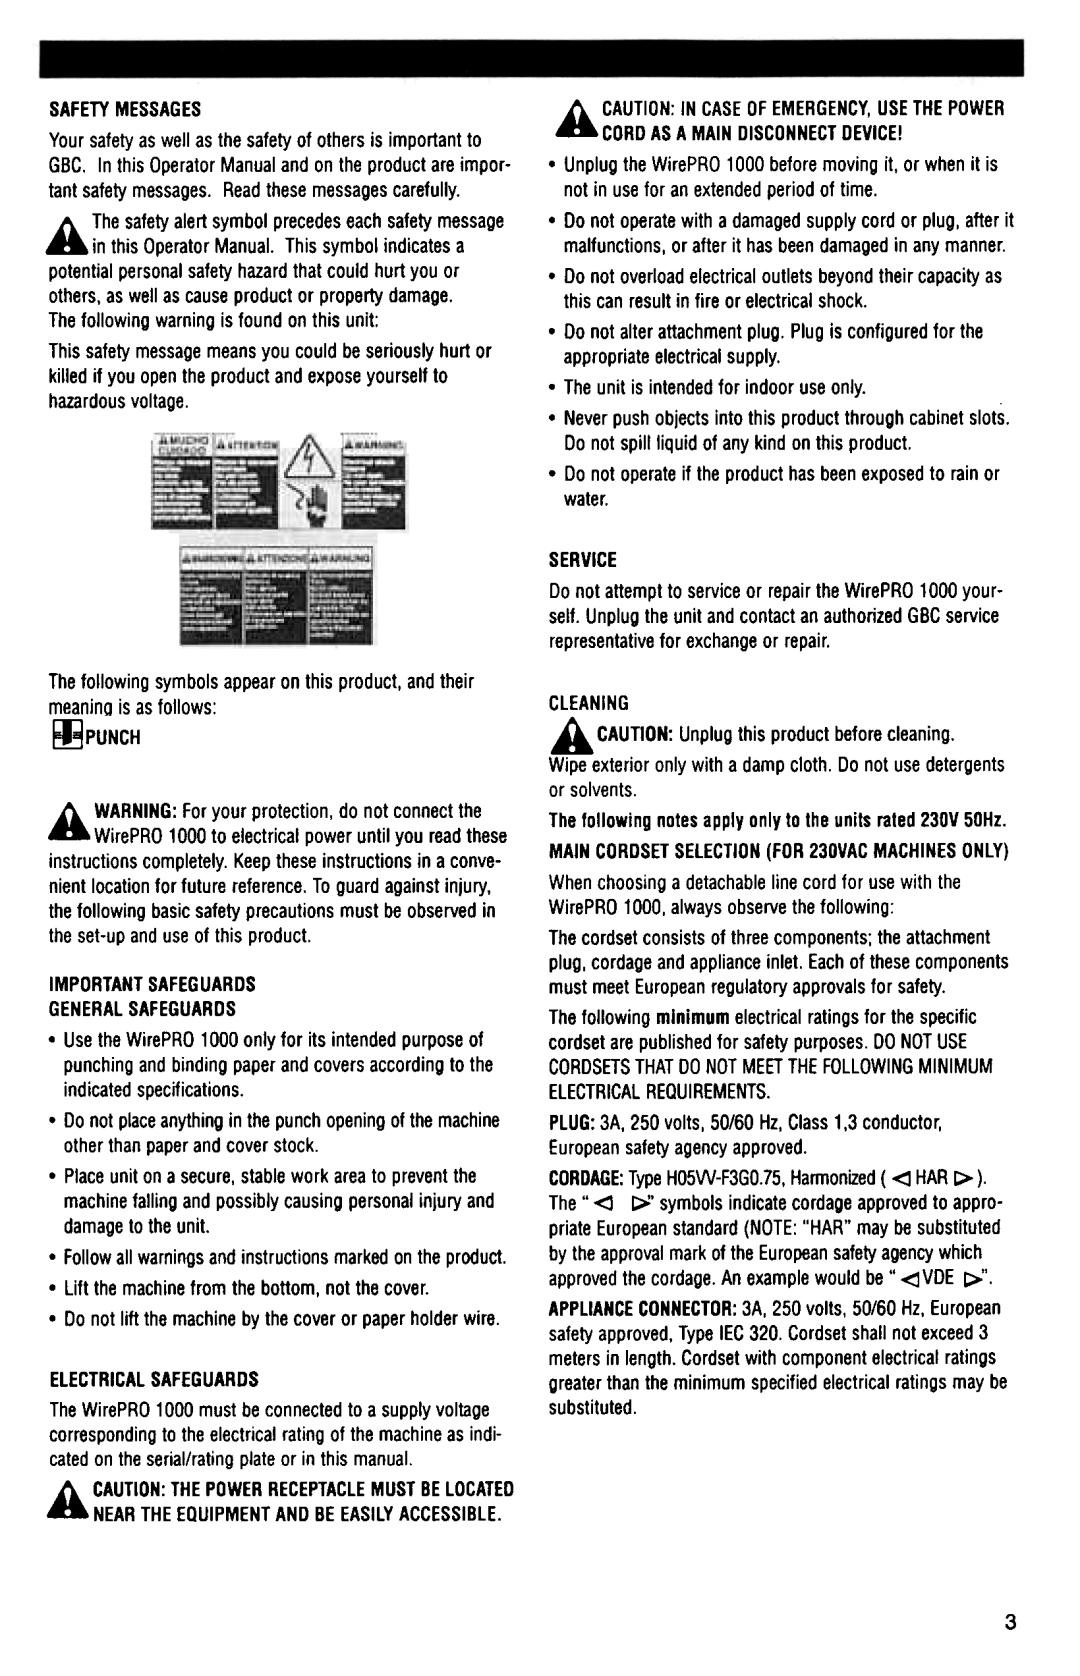 GBC 1000 manual Safetymessages 